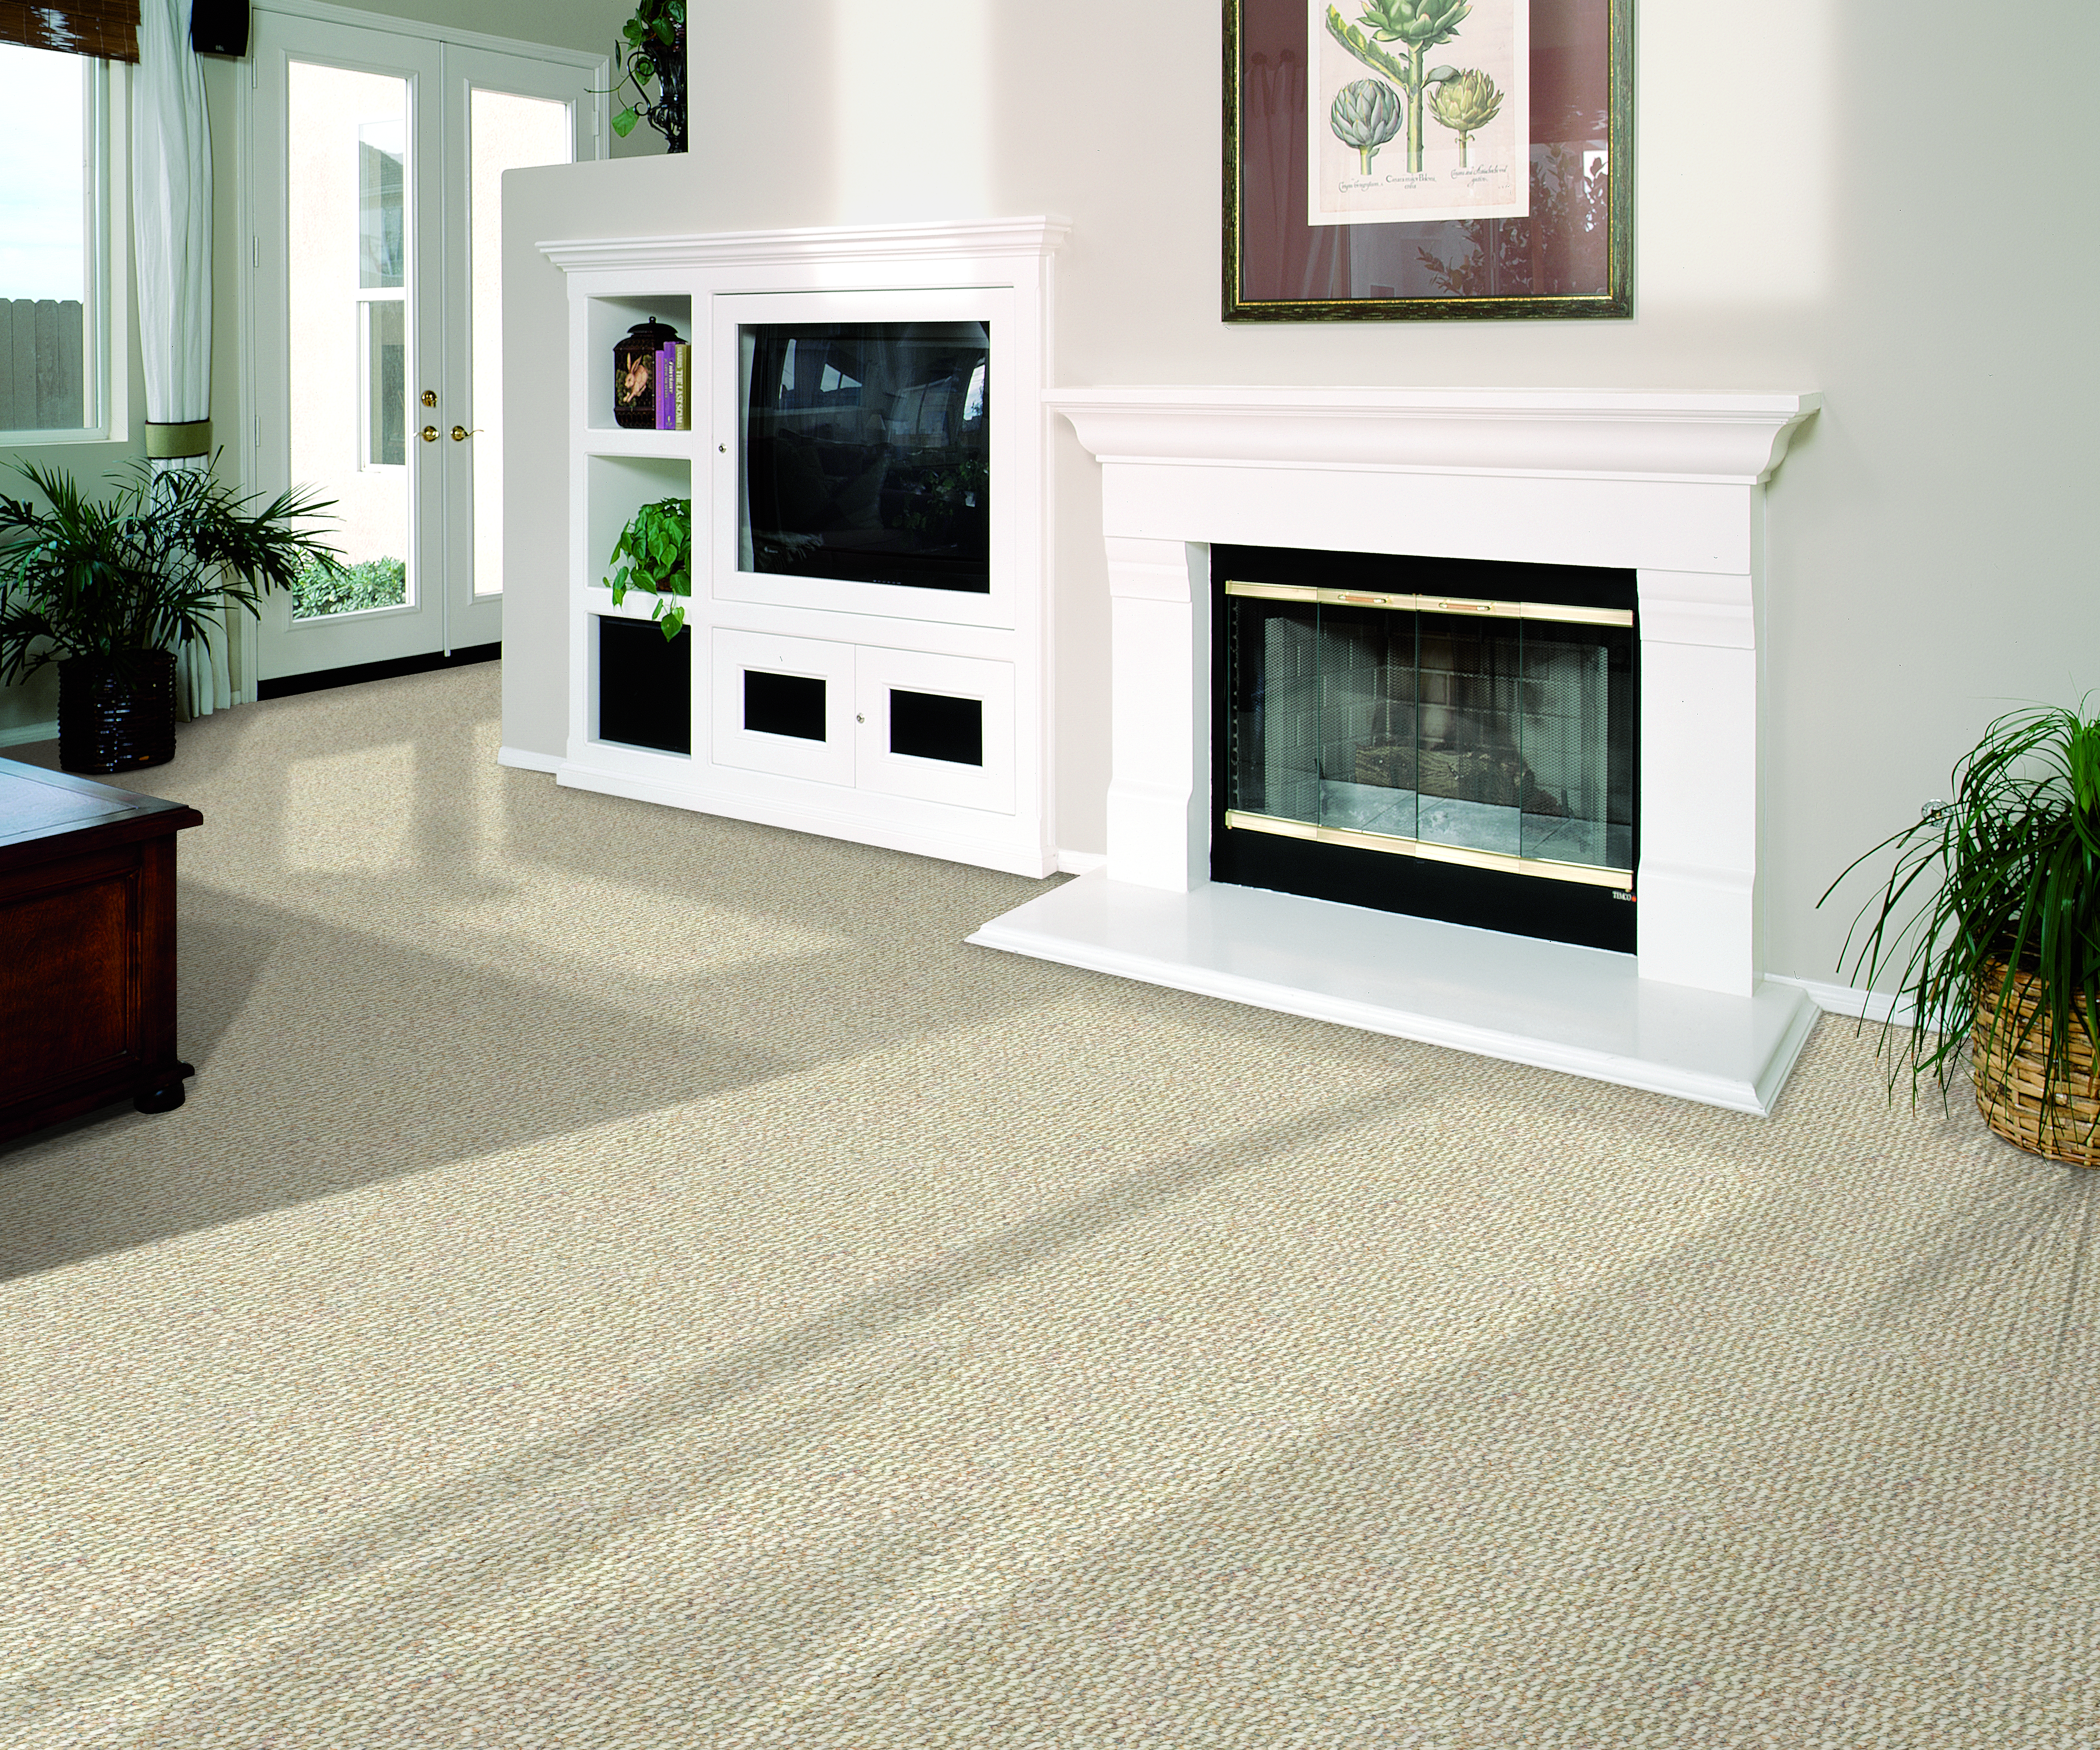 Make a Style Statement with Your Carpet Flooring 2